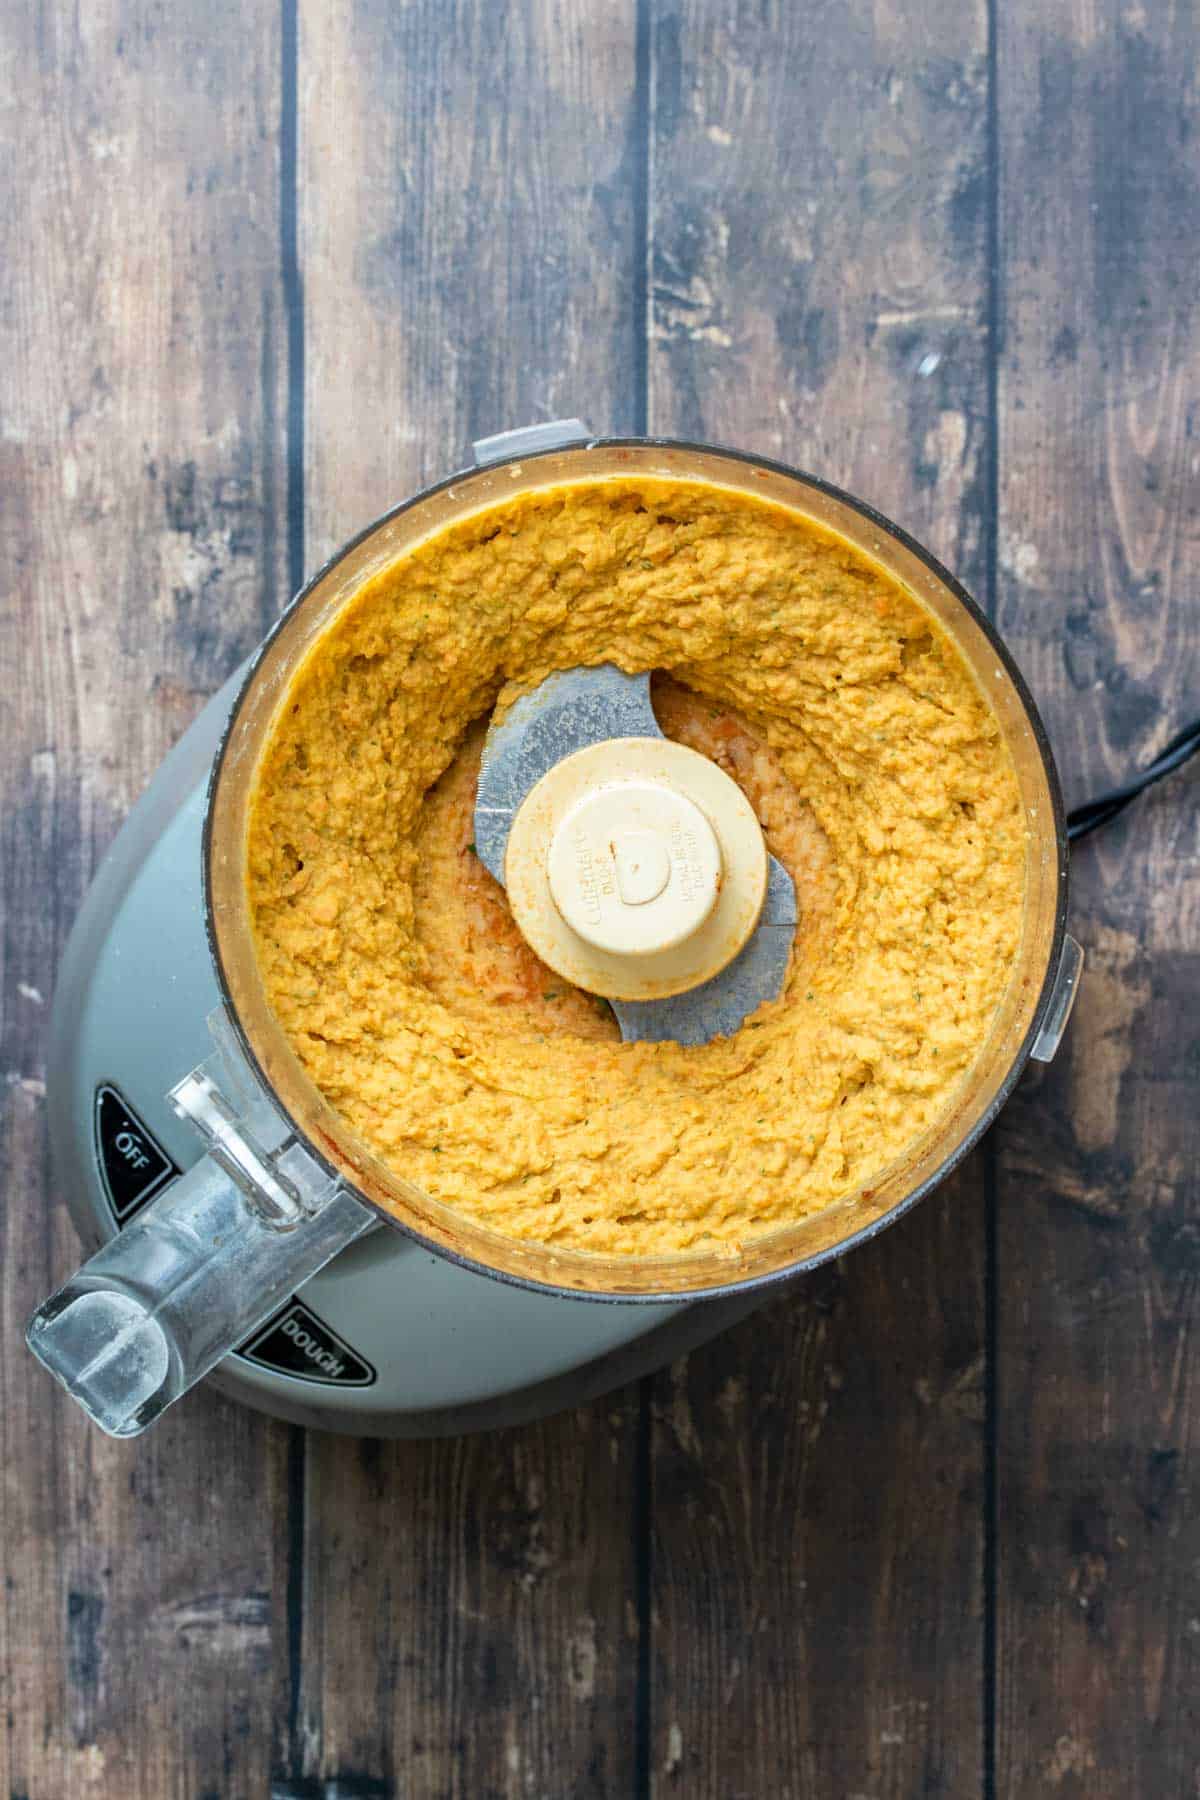 Top view of a food processor on a wooden surface with an orange colored hummus inside